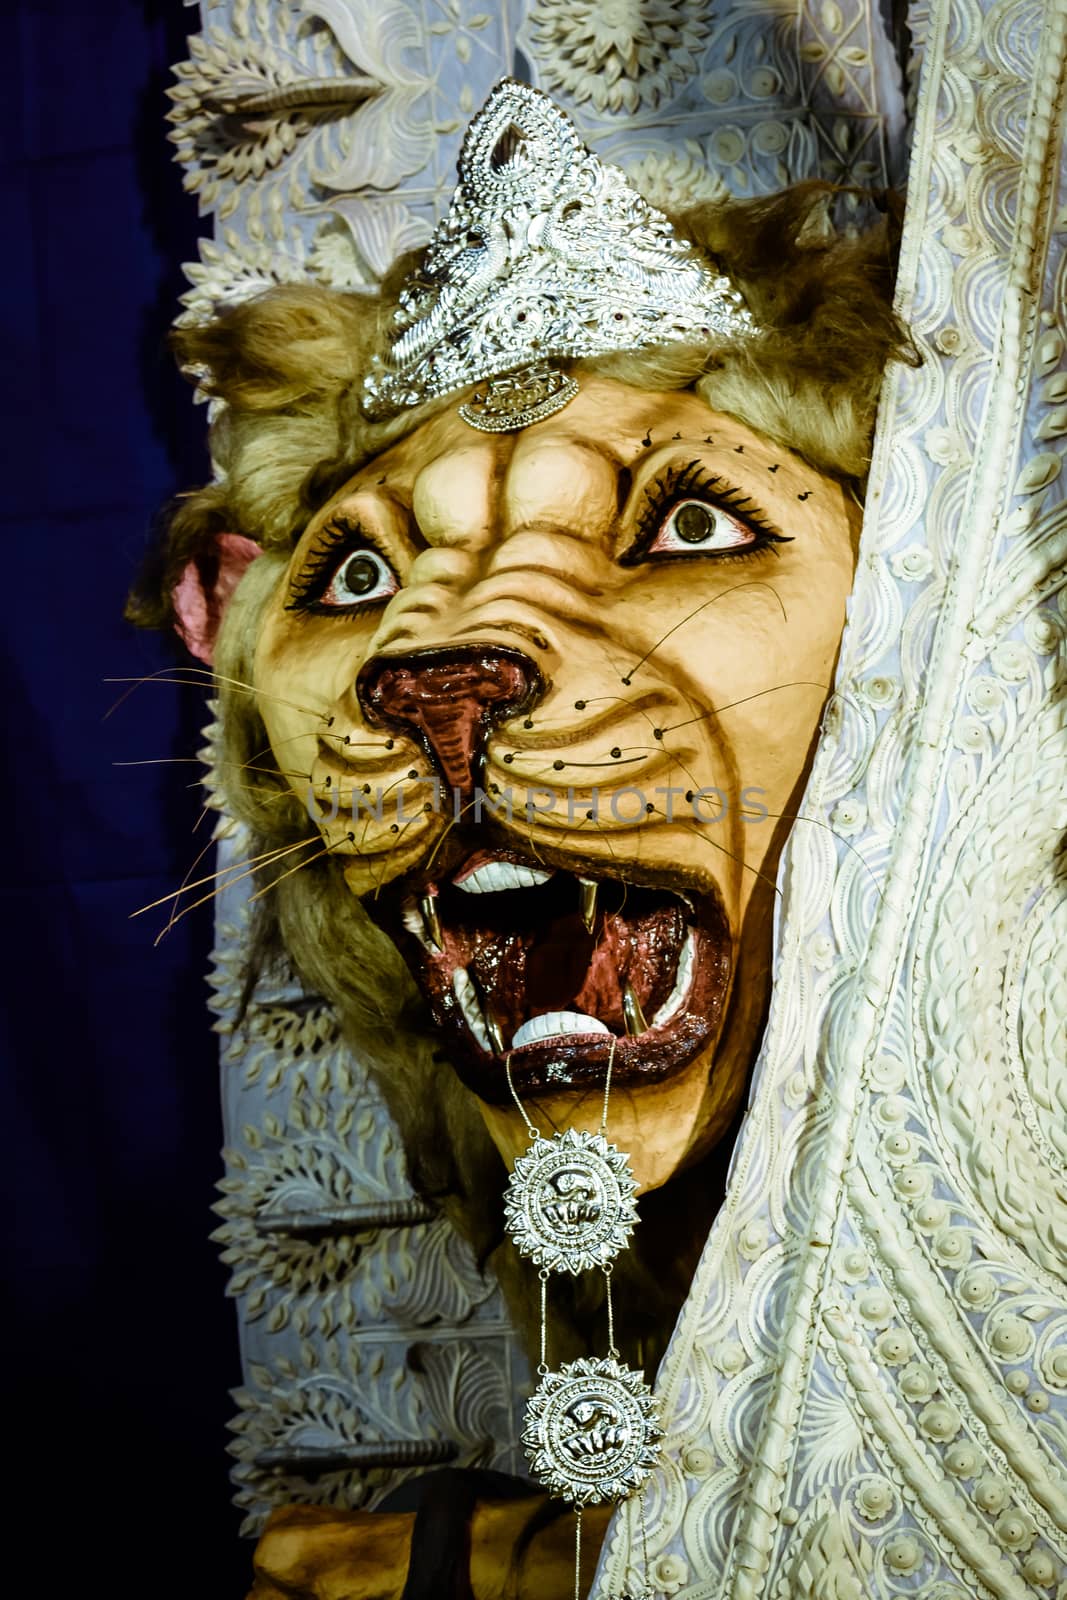 Kolkata India October 2018 - Close up portrait of Screaming horror face of King Bengal Tiger Head. Ghost cruel, Scary halloween shot in Durga Puja festival. A Lion symbolizes power to destroy evil.